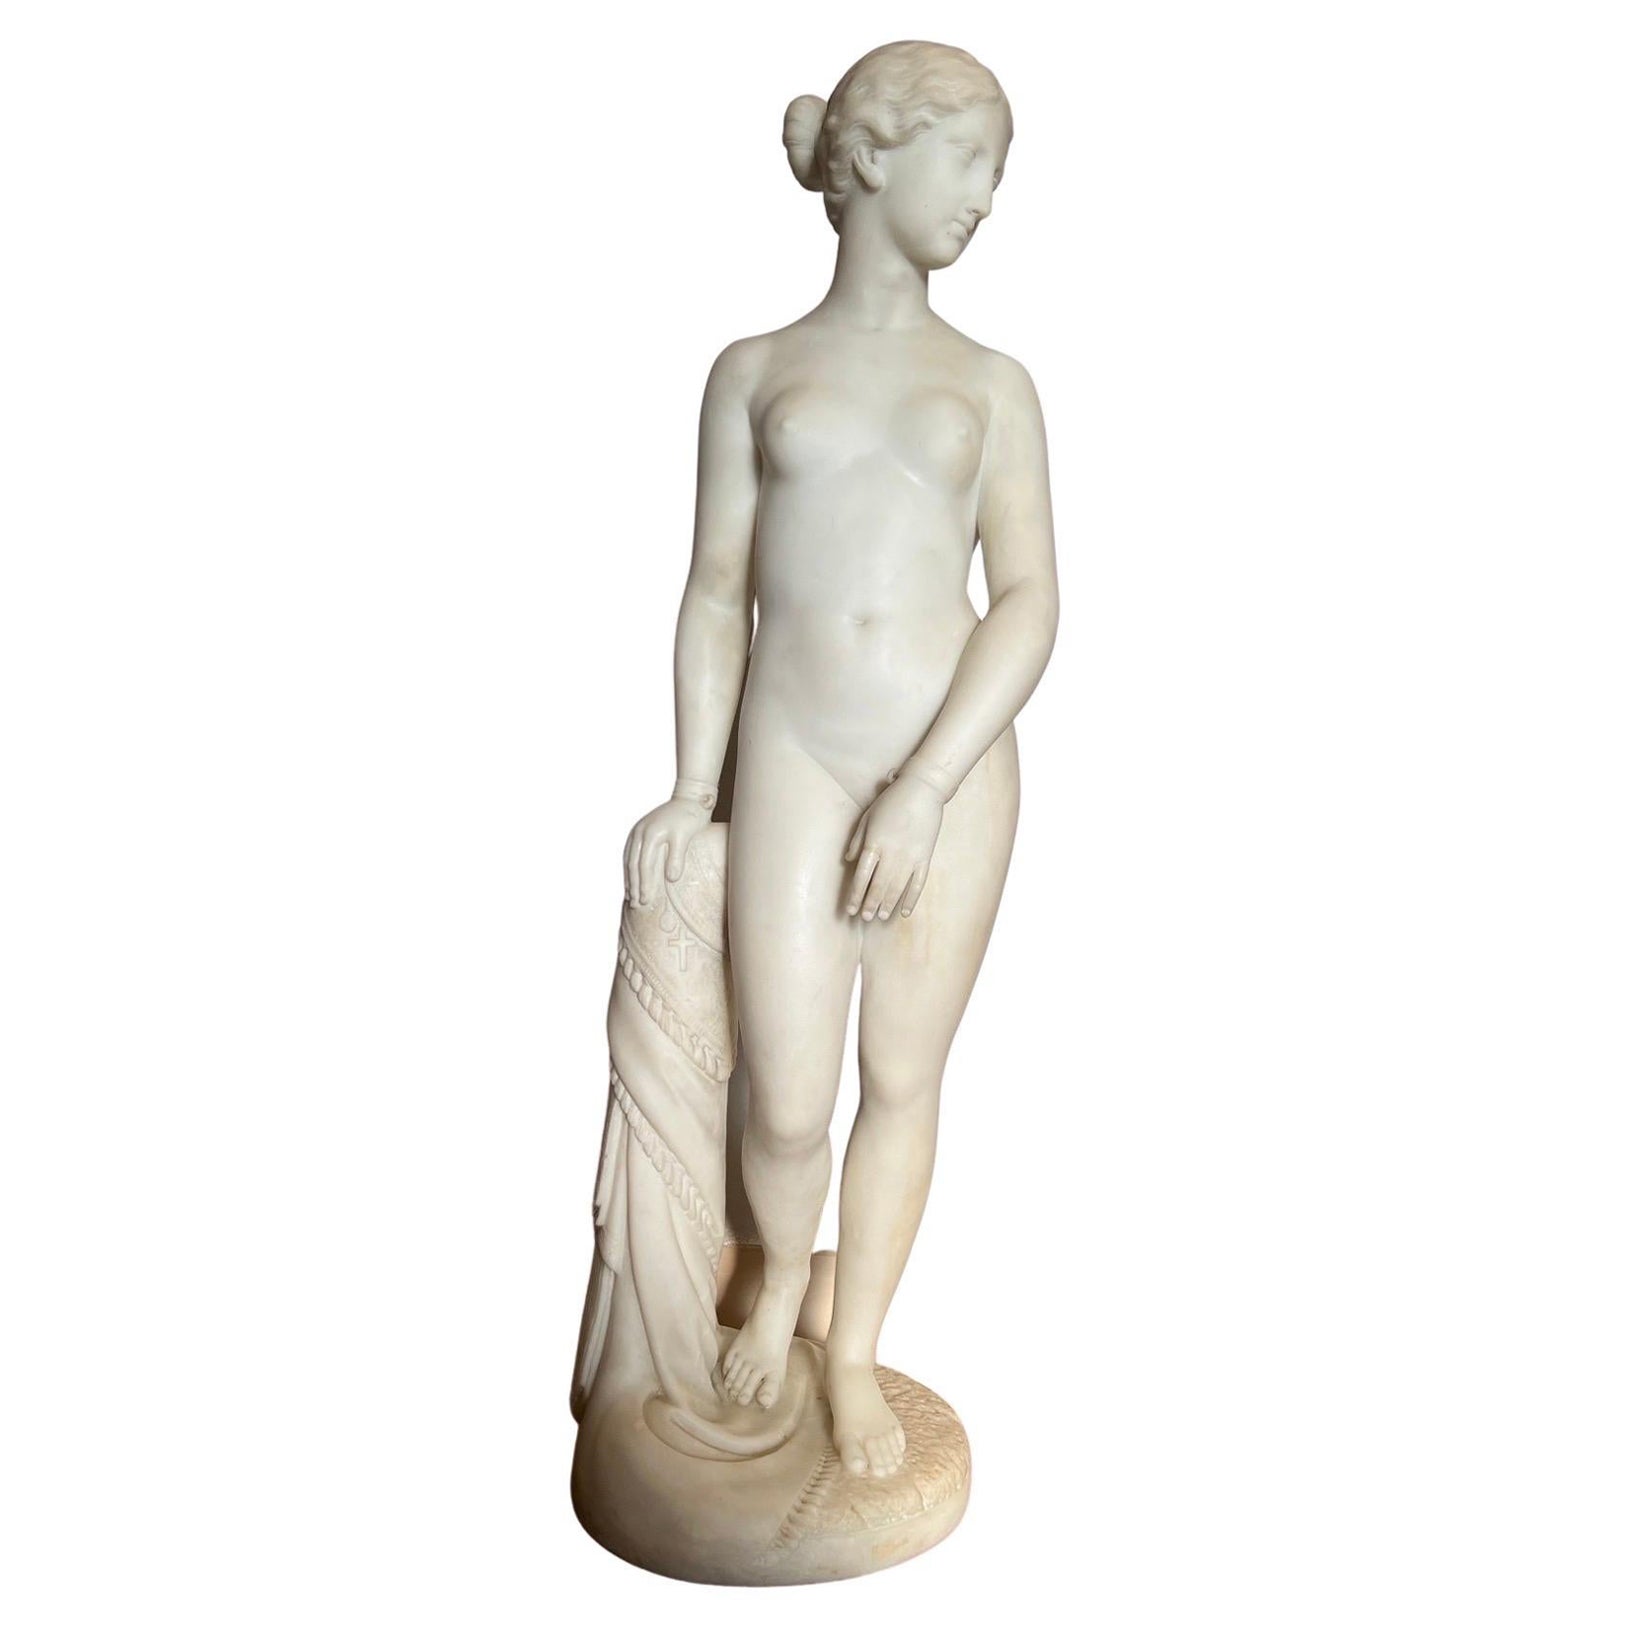 After Hiram Powers, Grand Tour Marble Sculpture of “the Greek Slave” For Sale